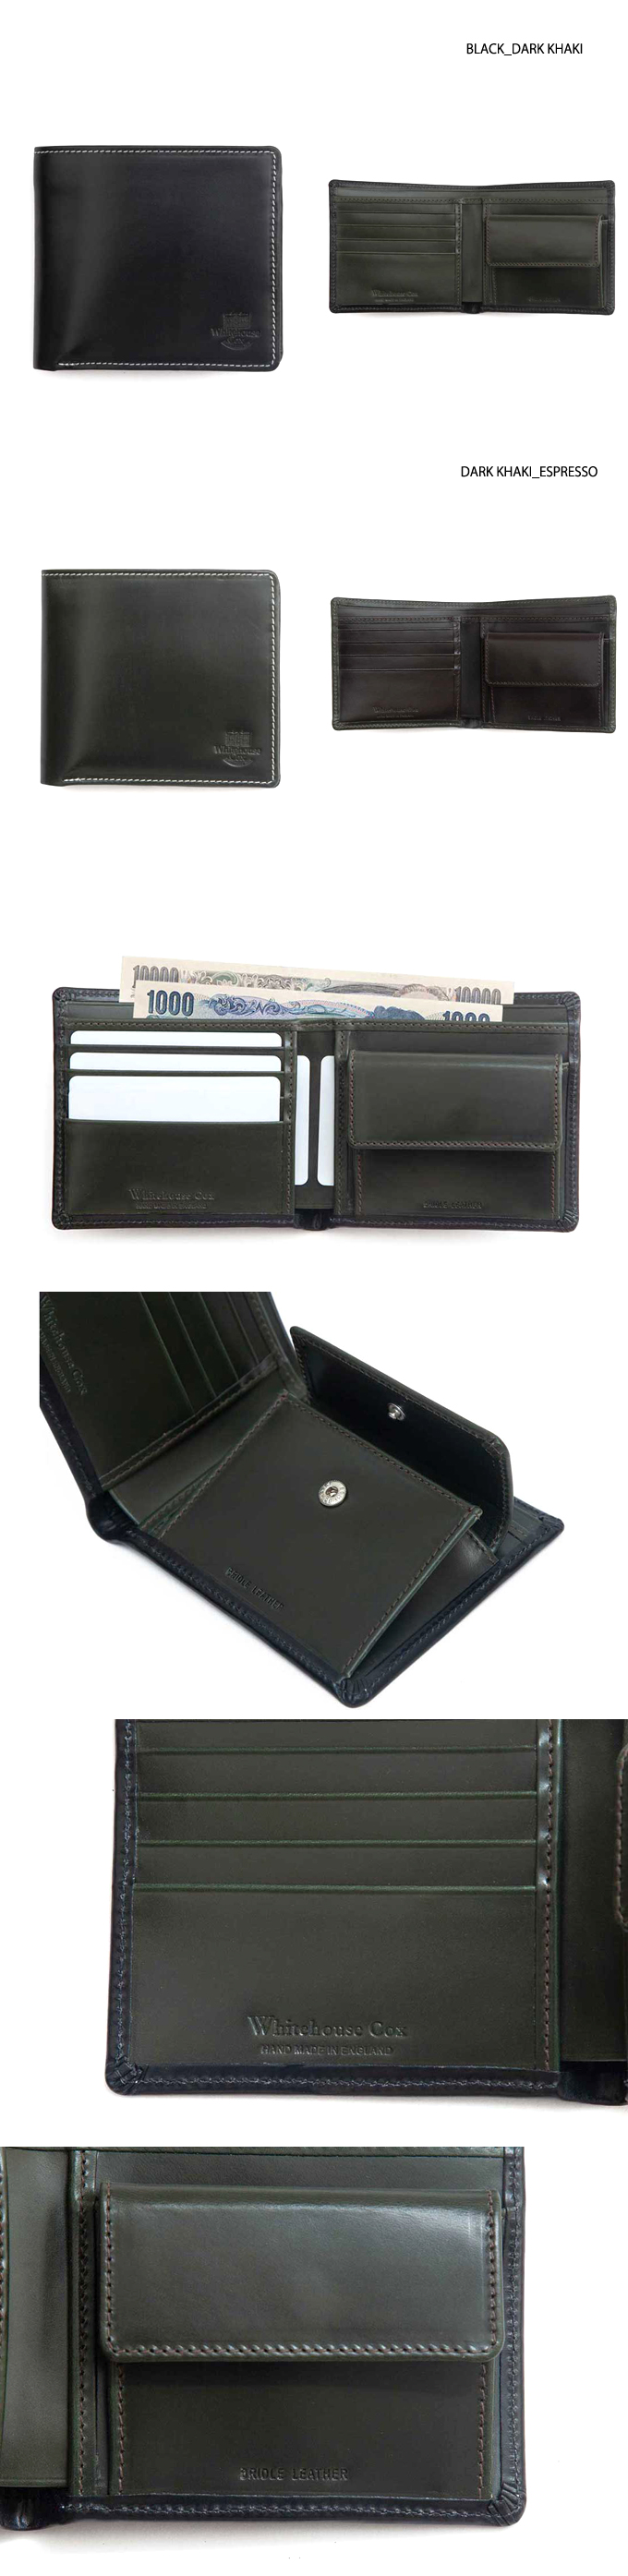 Whitehouse Cox S7532 COIN WALLET / HOLIDAY LINE 2021